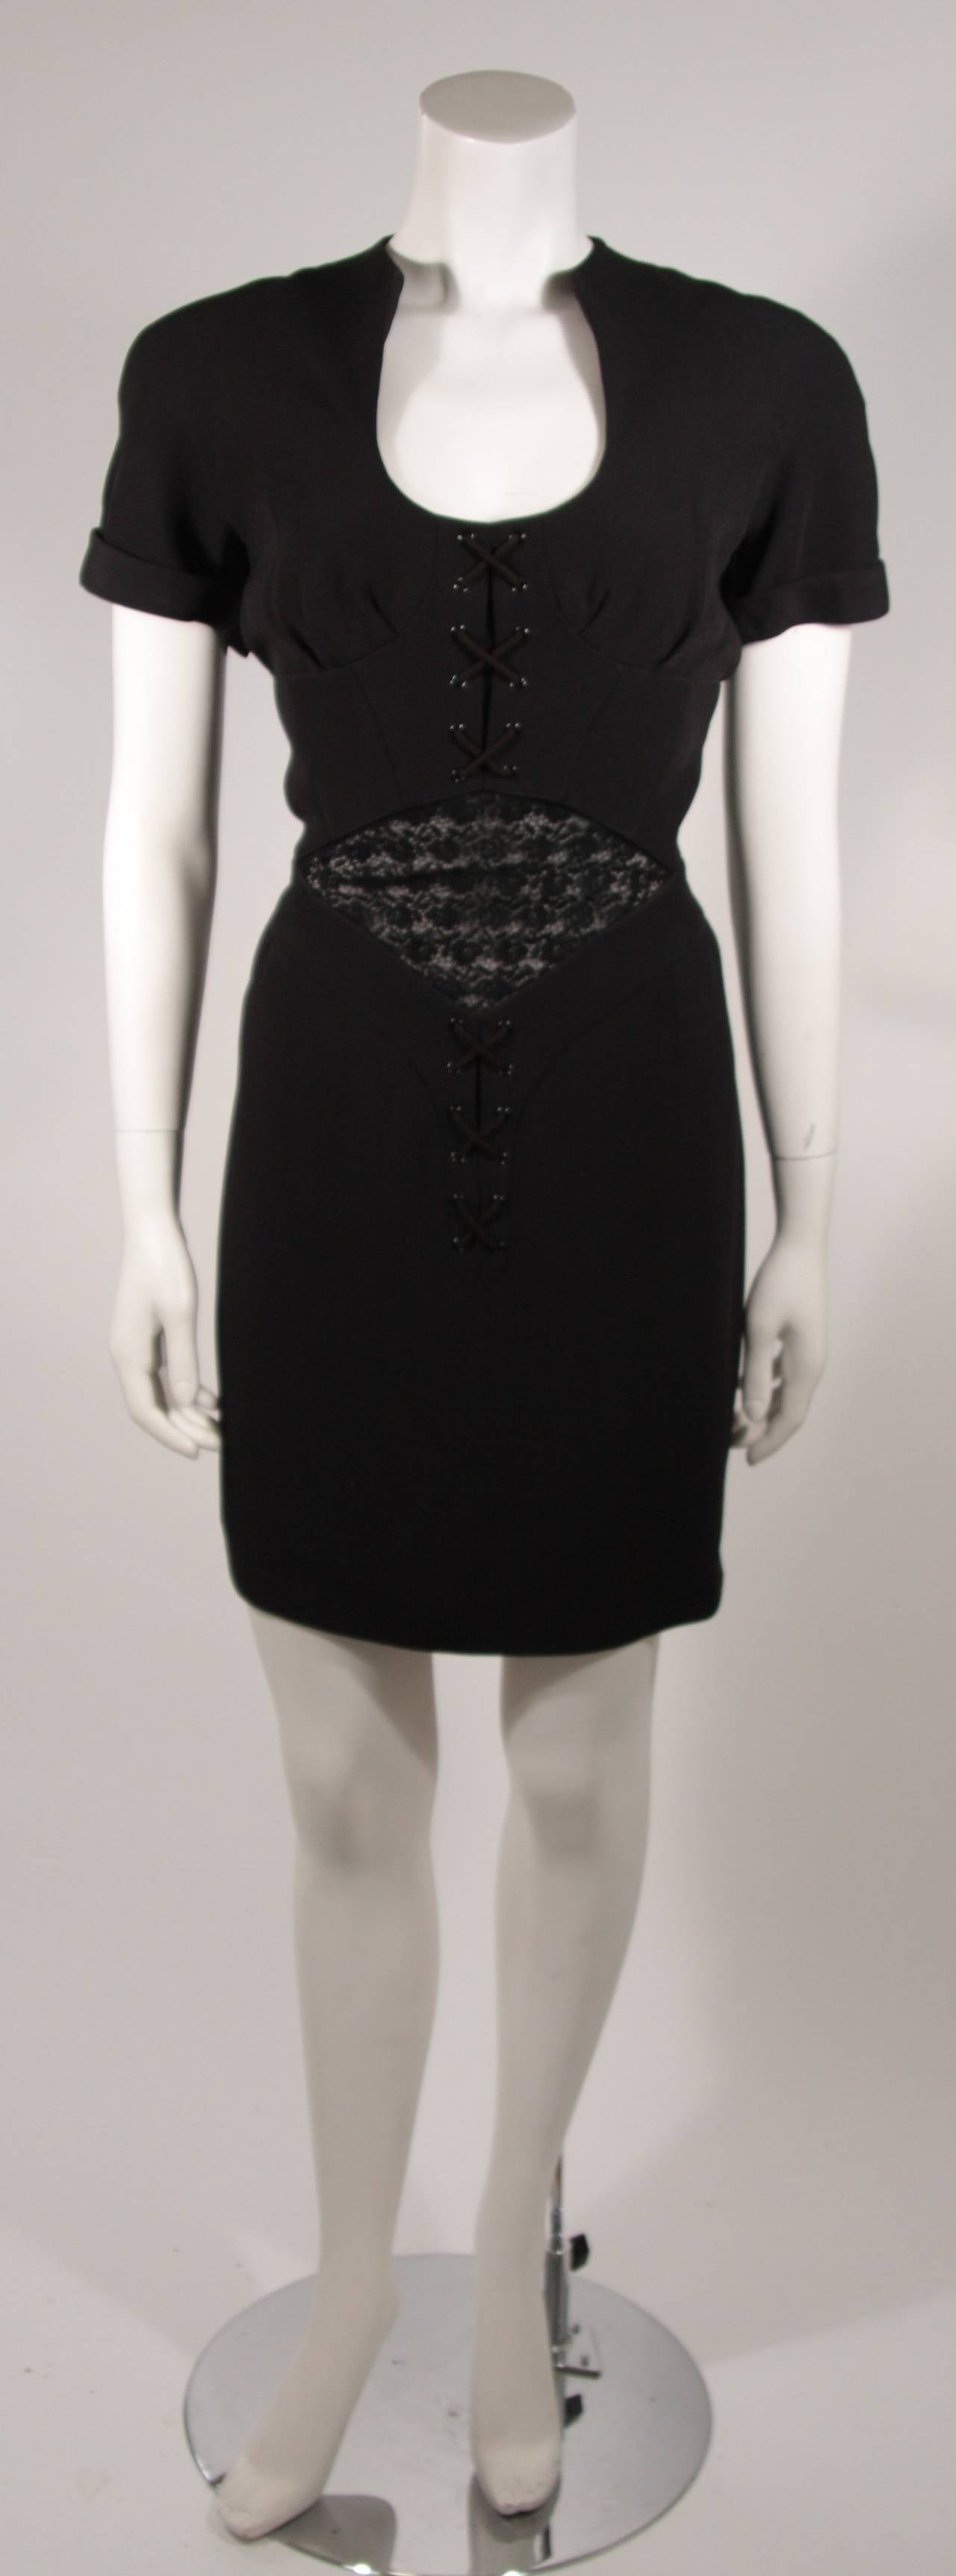 This Theirry Mugler dress is composed of a black fabric which is accented by a lace mesh insert  at the waist and center front corset detailing. Center back zipper closure. Made in France. 

Measures (Approximately)
Size 40 
Length: